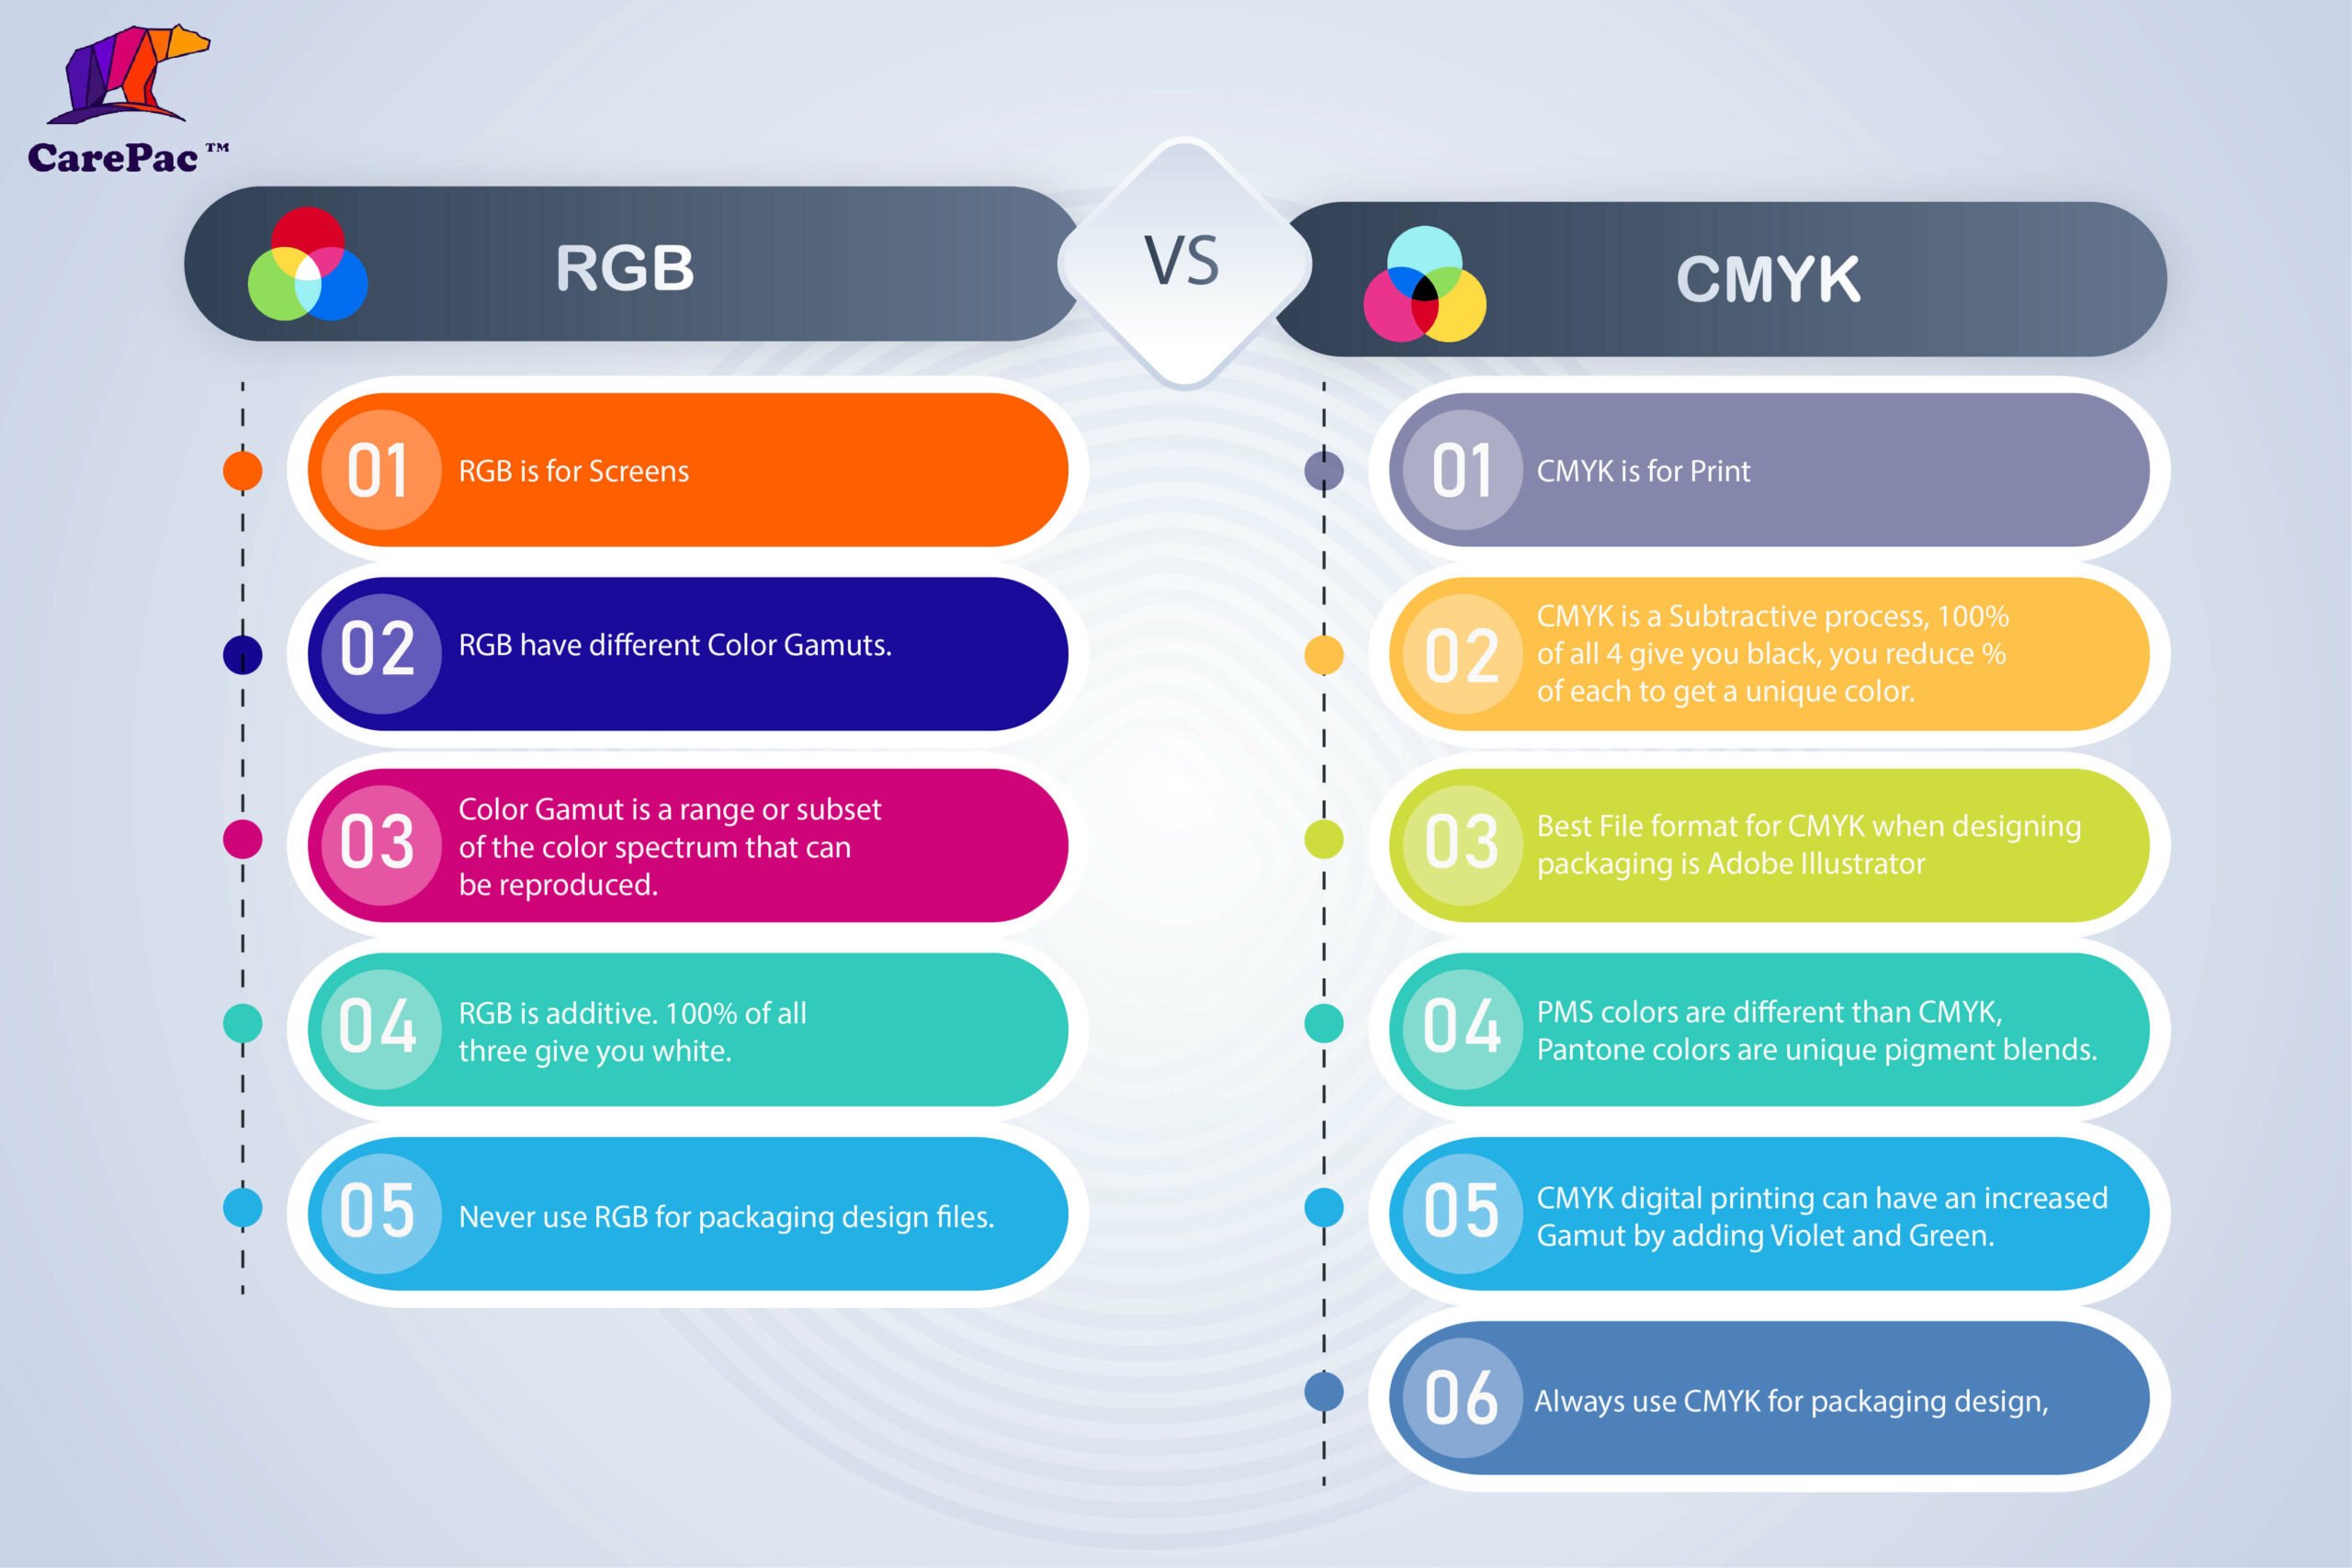 An infographic showing the differences between RGB and CMYK